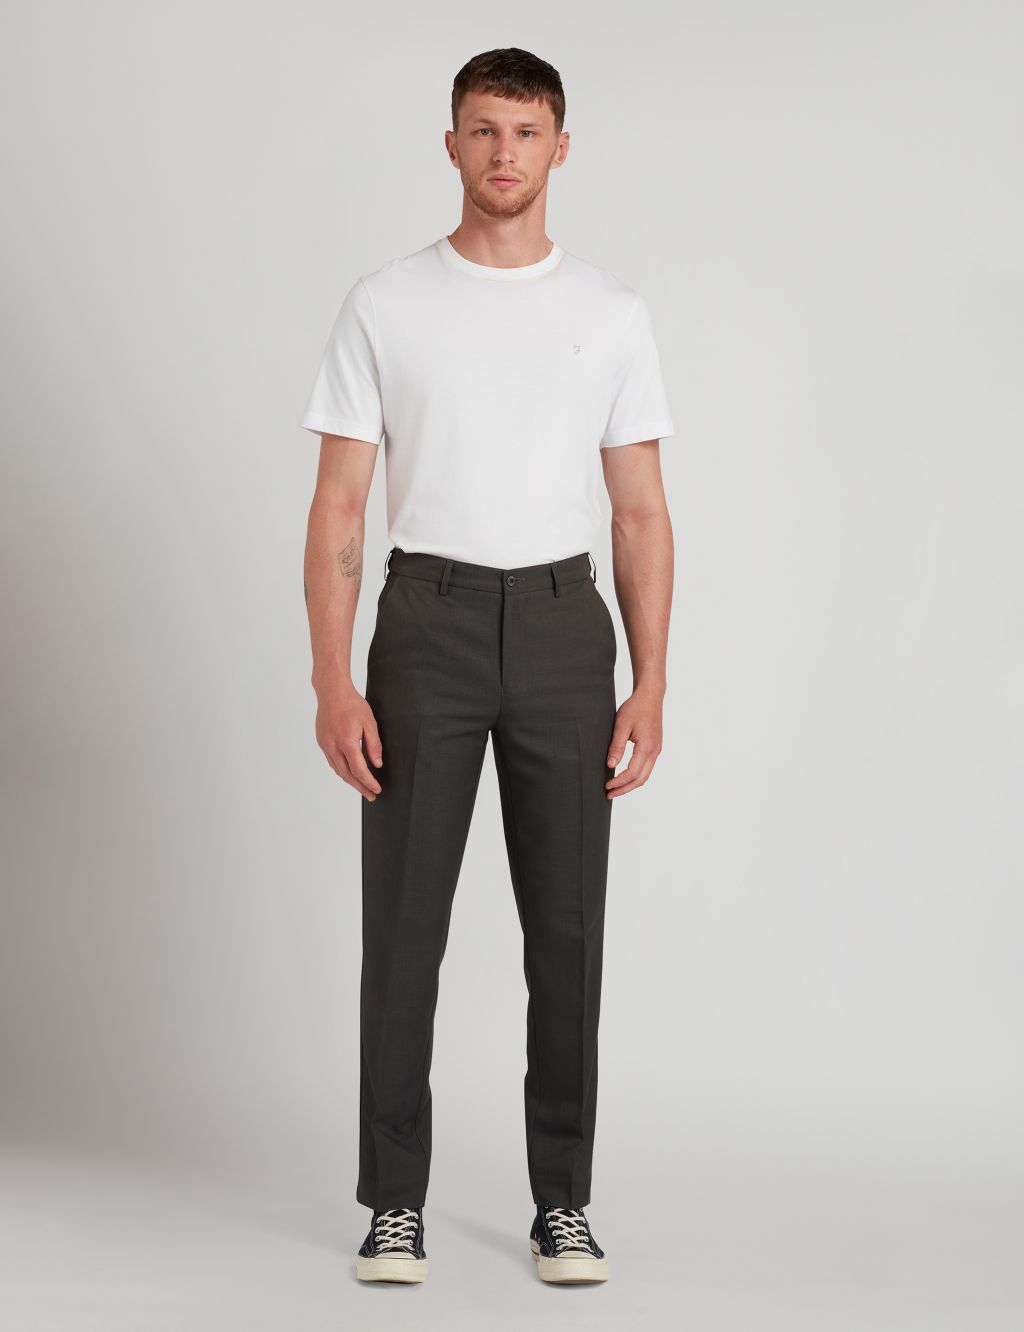 Tailored Fit Smart Trousers image 1